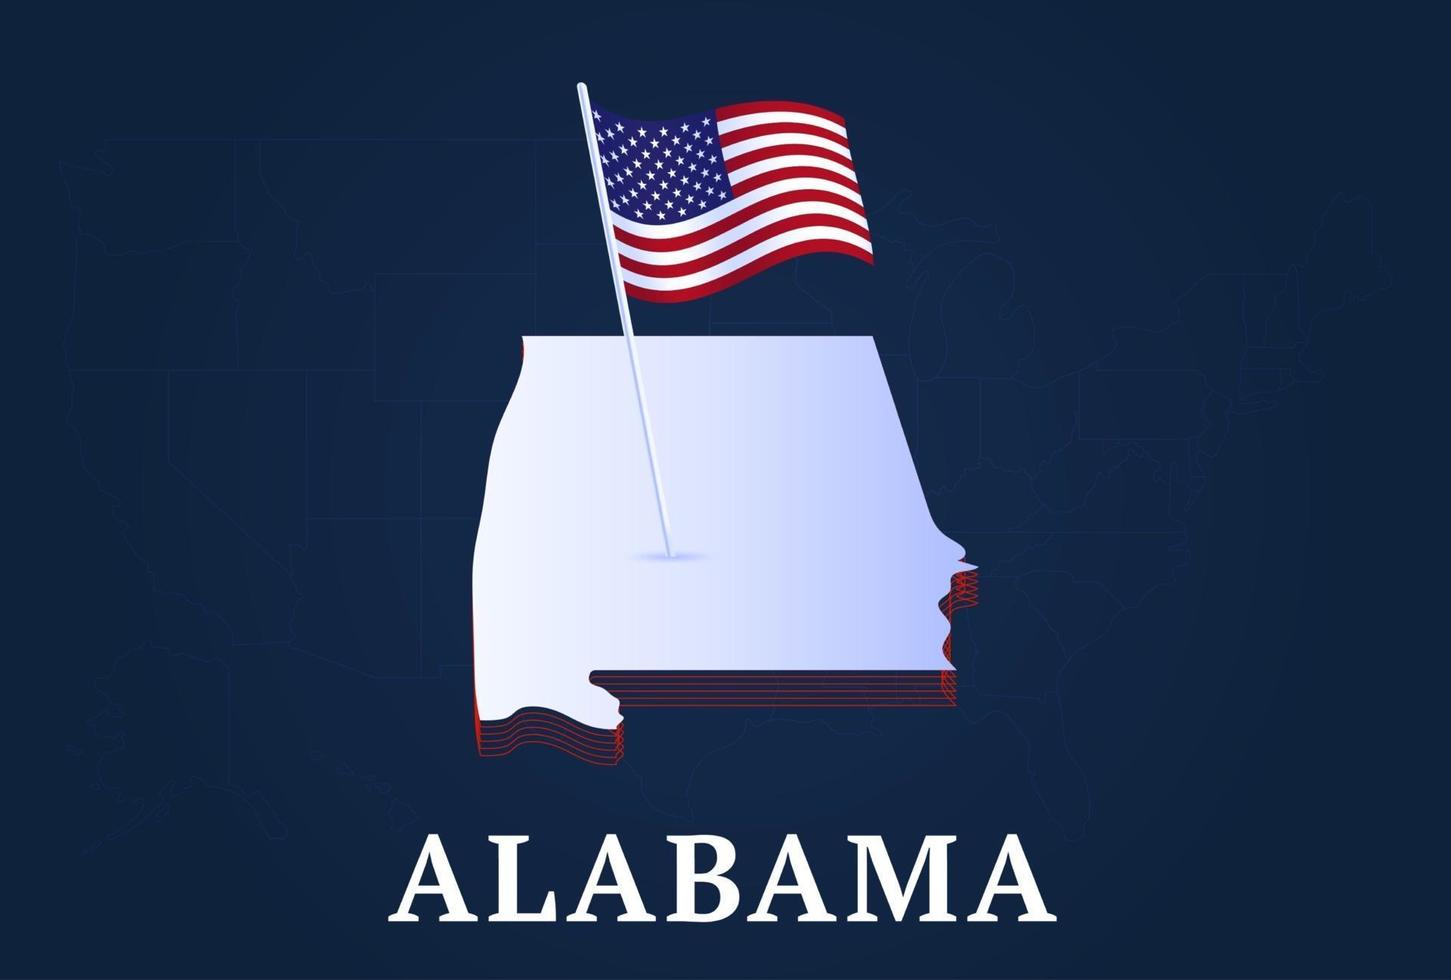 alabama state Isometric map and USA natioanl flag 3D isometric shape of us state Vector Illustration